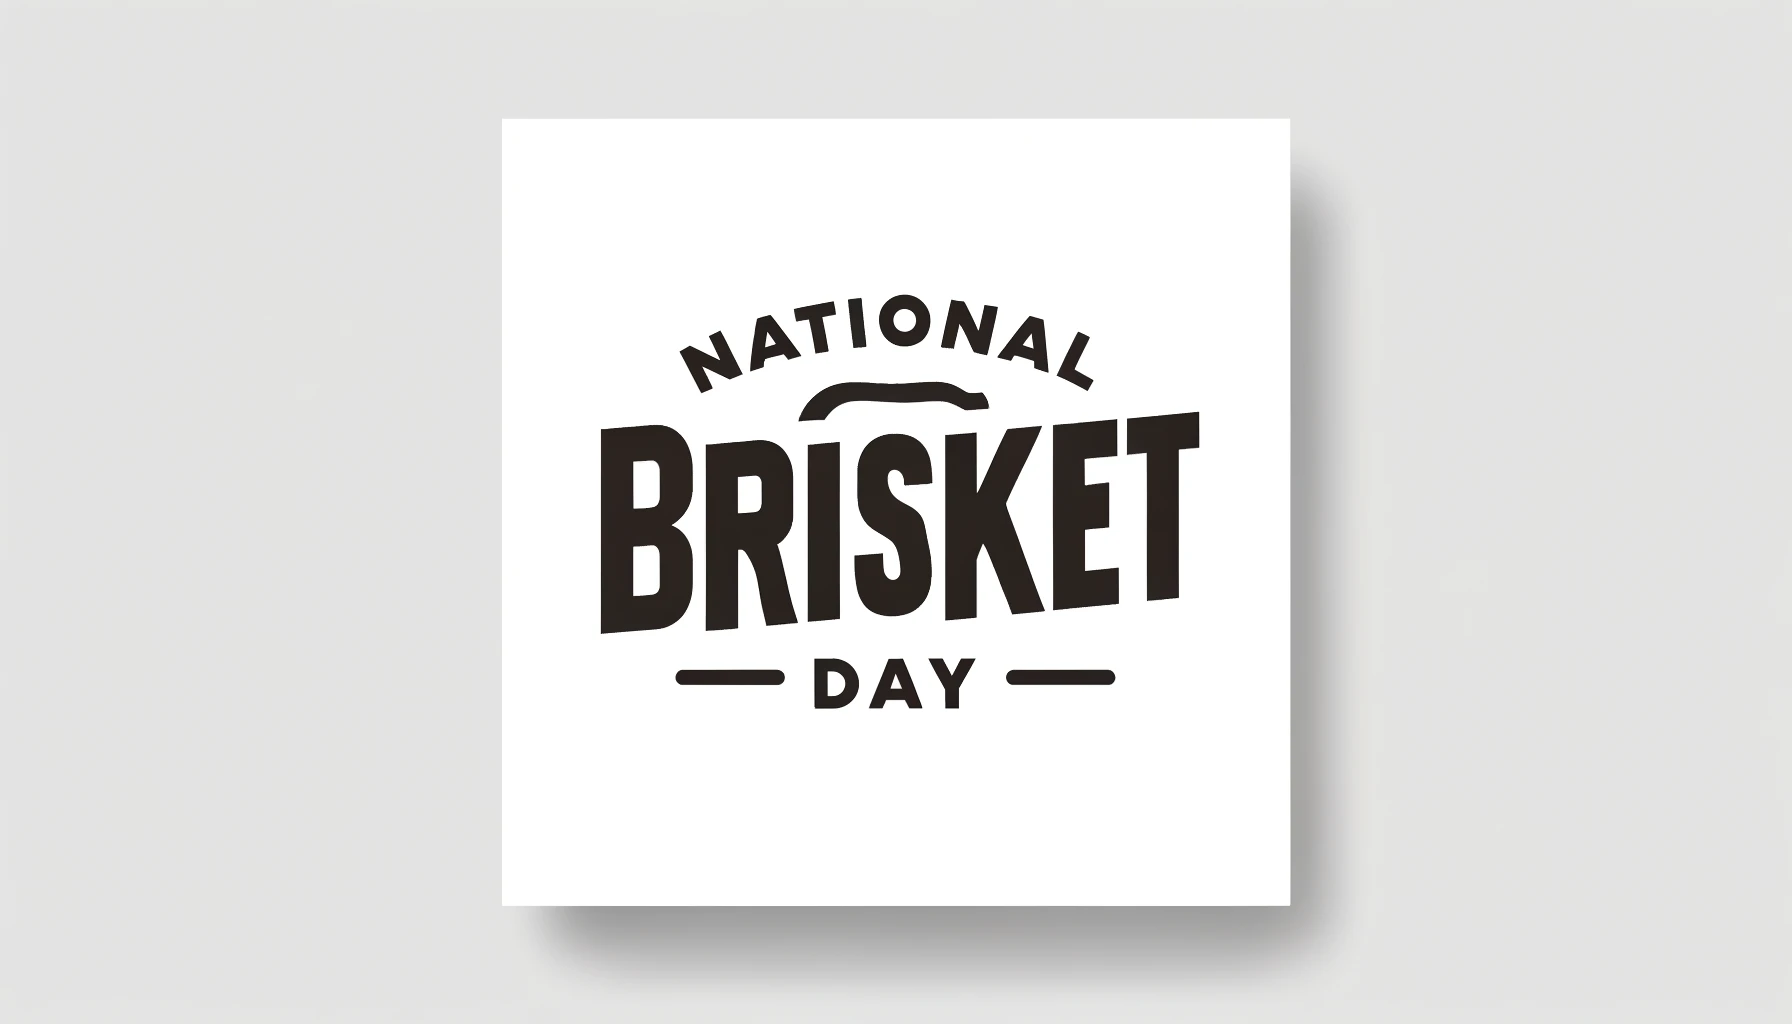 Tasty Brisket Day Wishes for Meat Lovers